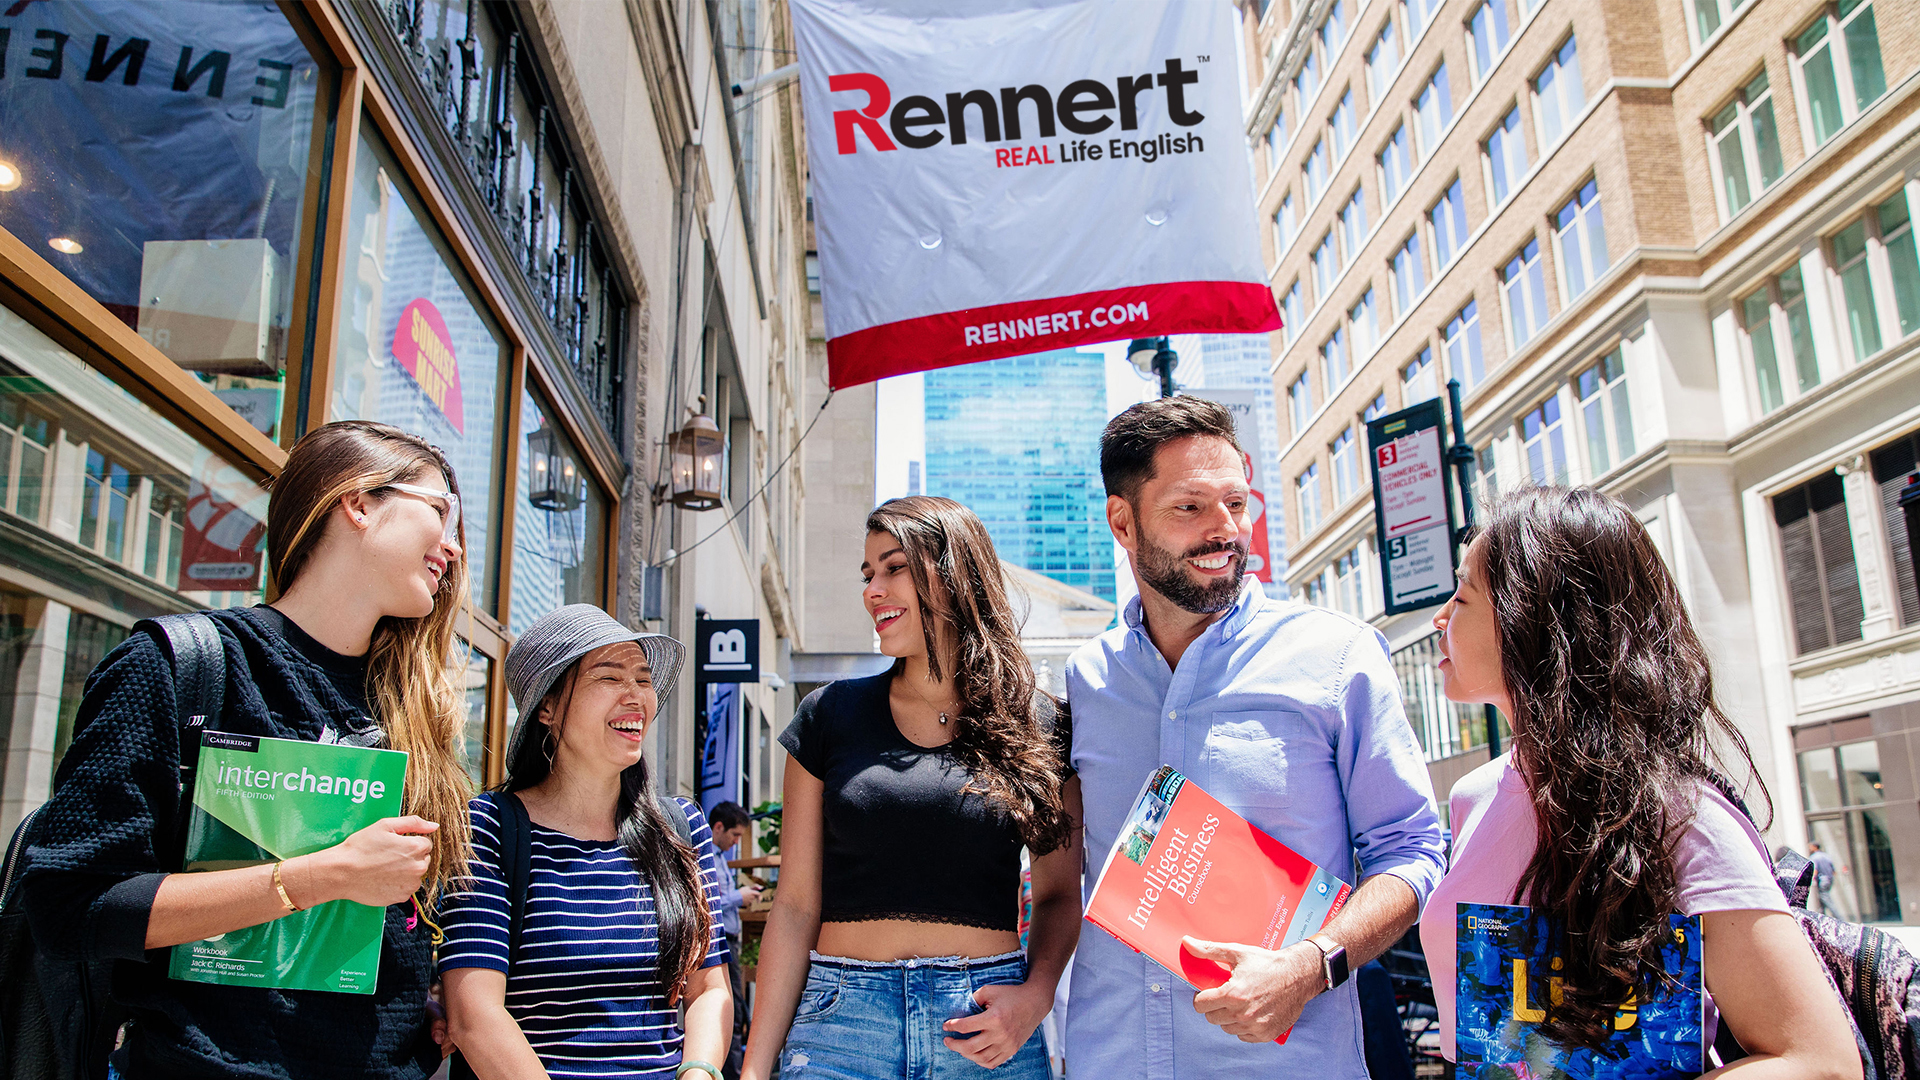 Rennert School Entrance with Students